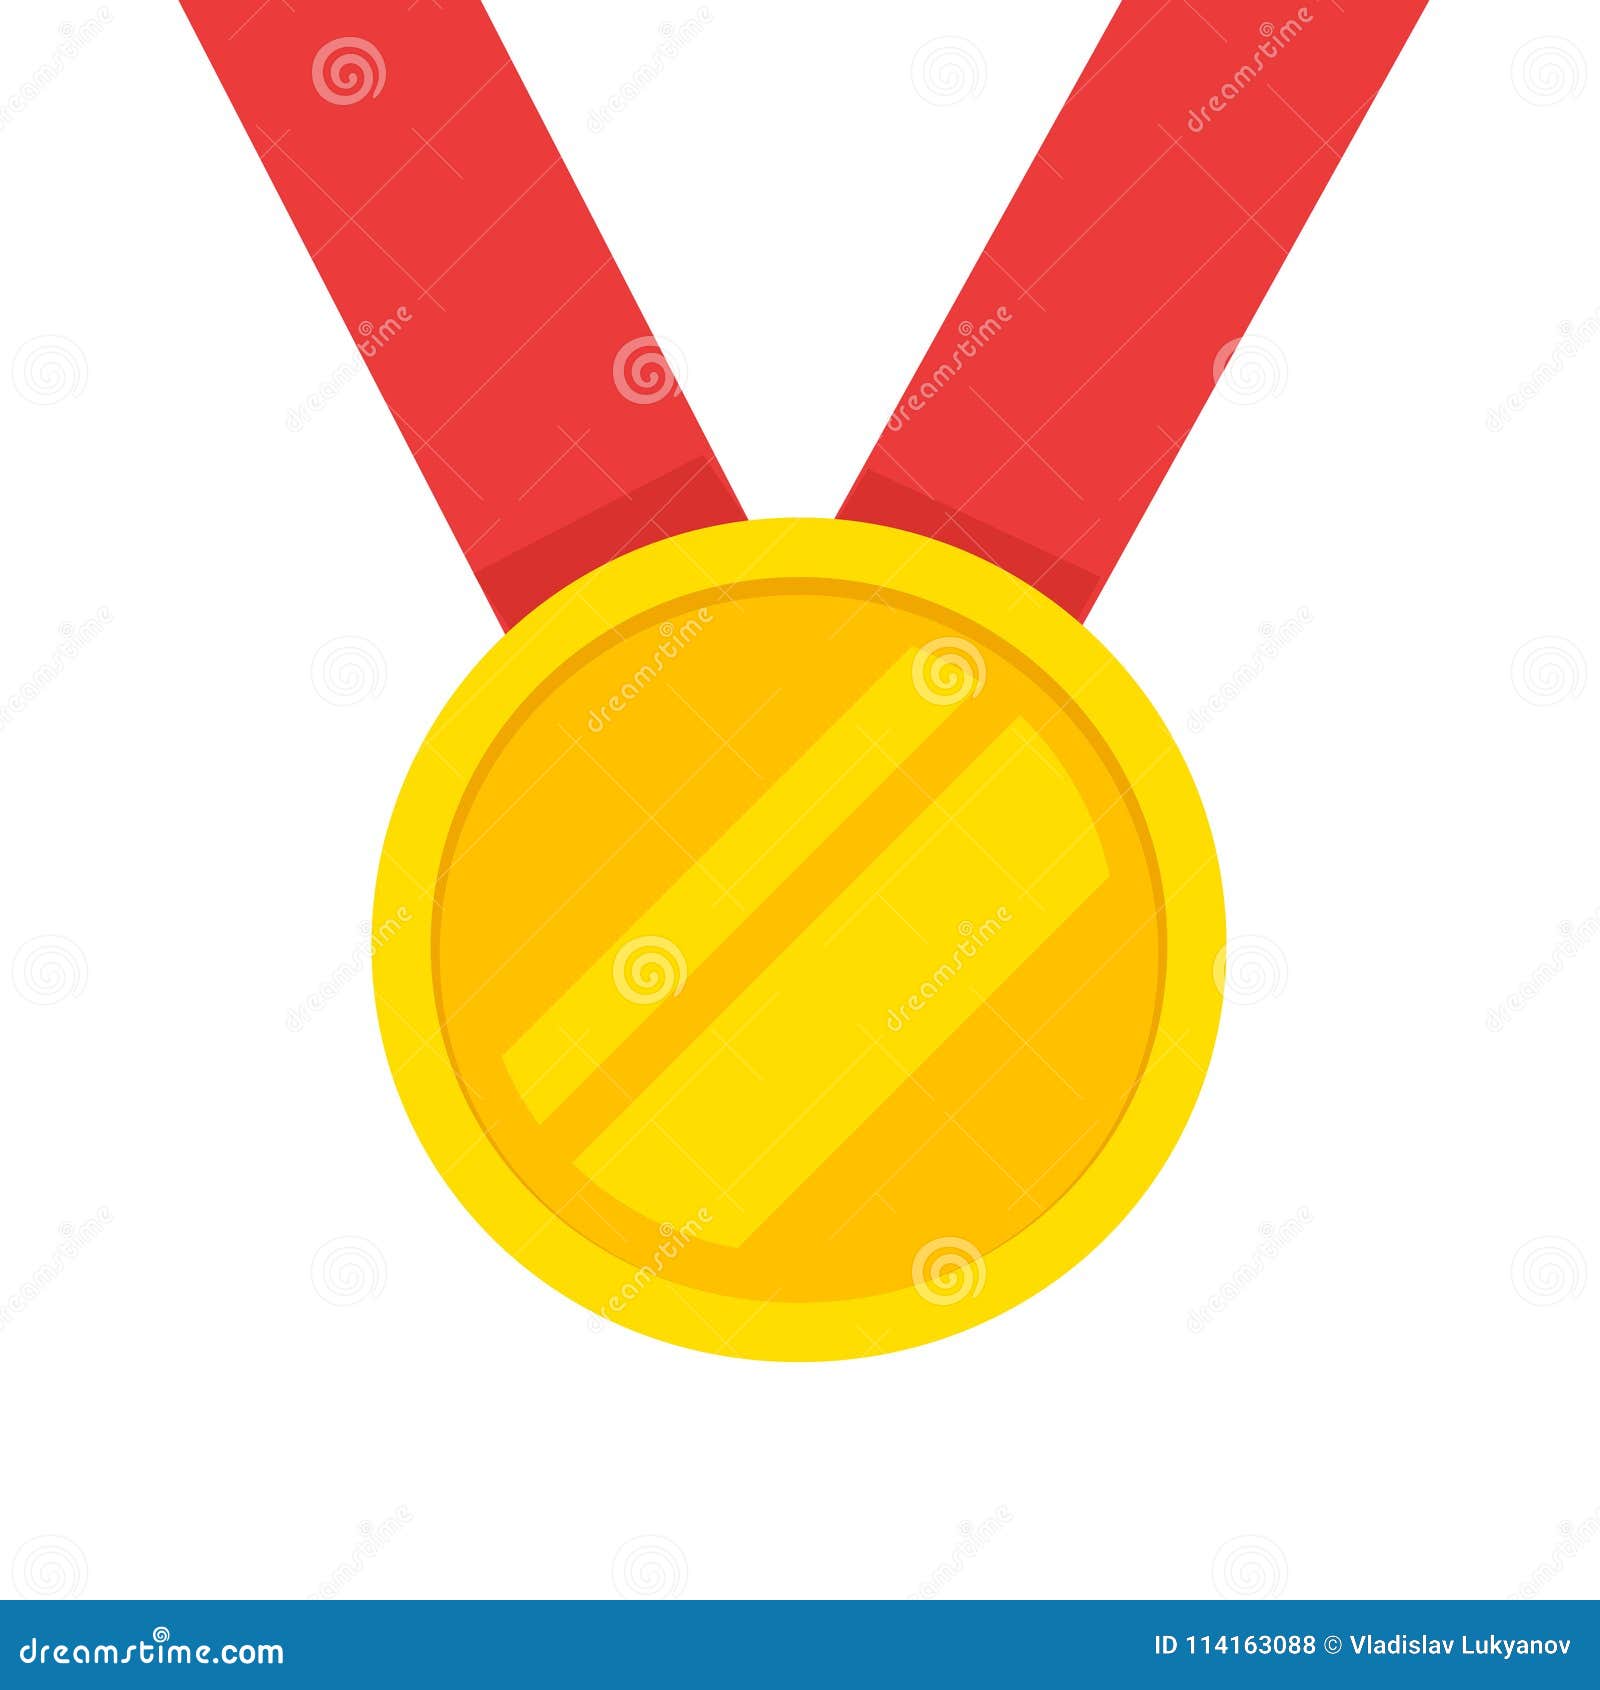 Gold Medal with Red Ribbon Vector Icon, Flat Cartoon Golden Medallion Award  Hanging Isolated on White Clipart Stock Vector - Illustration of badge,  empty: 114163088